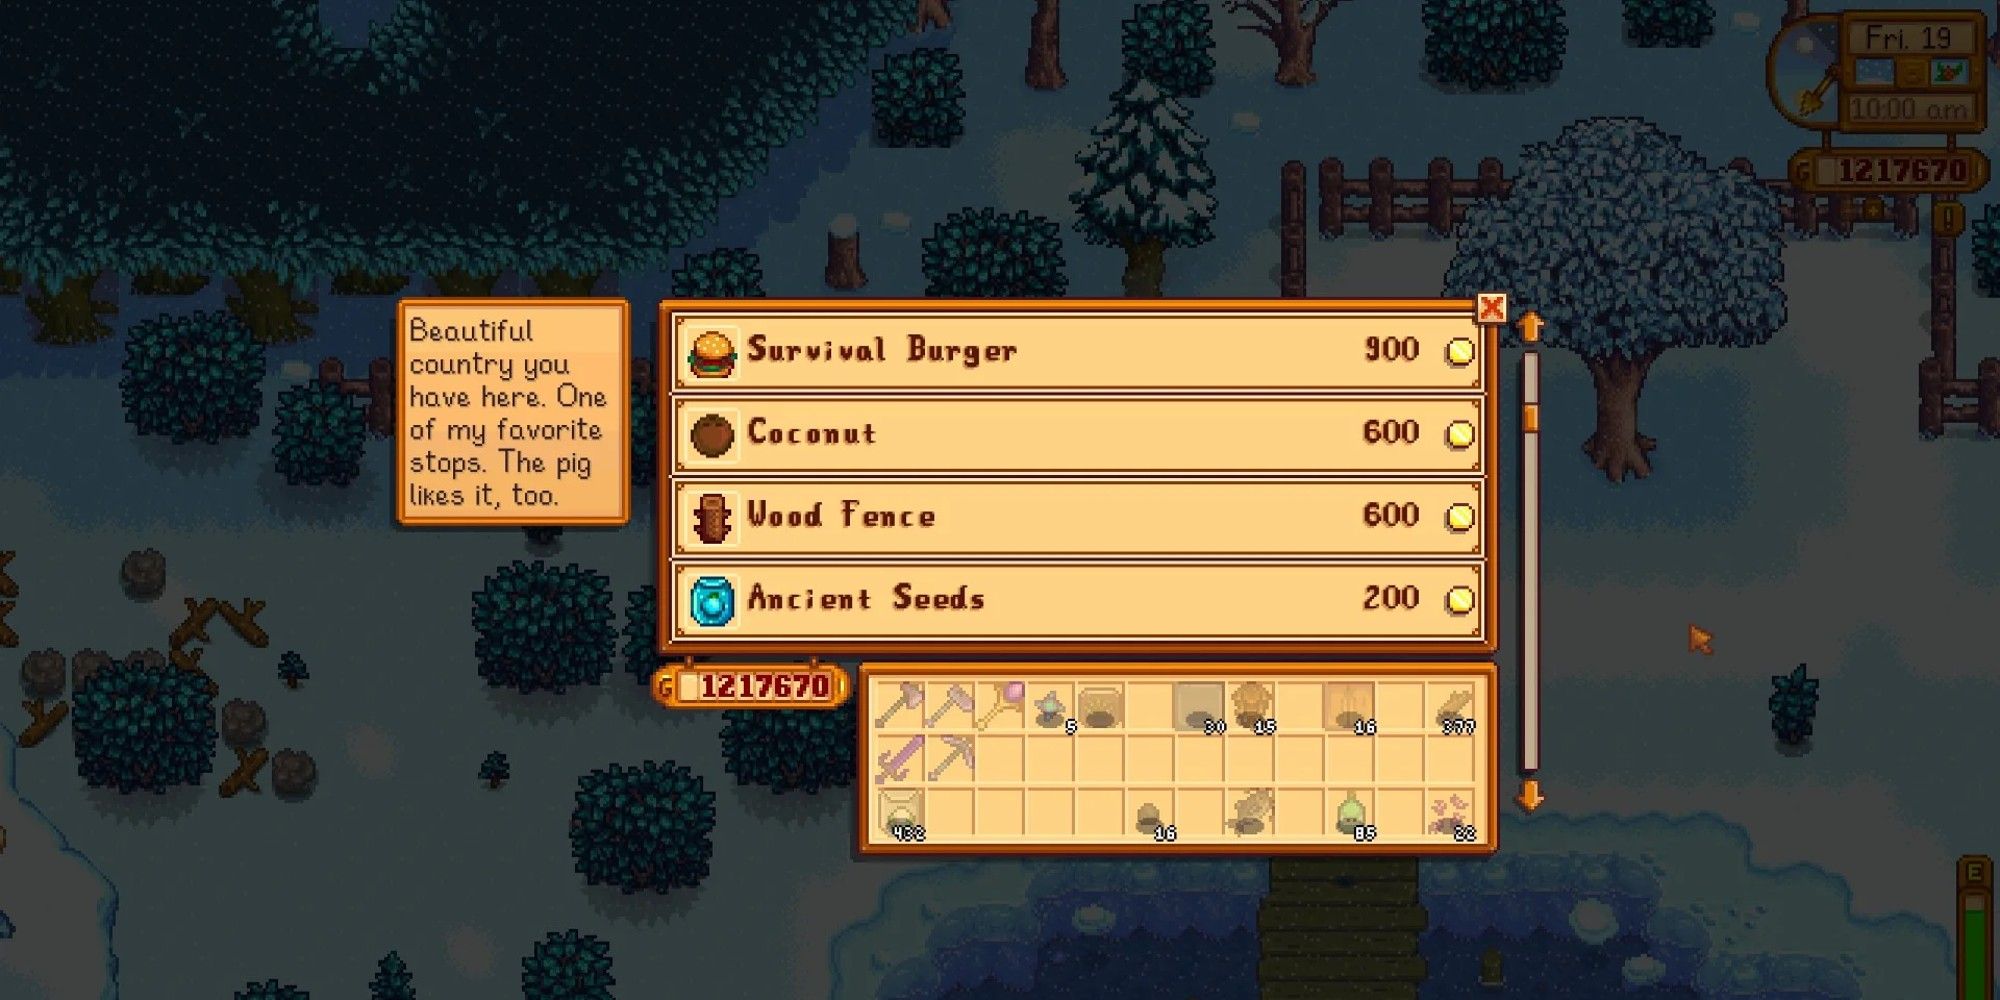 shop menu for traveling merchant with ancient seed highlighted